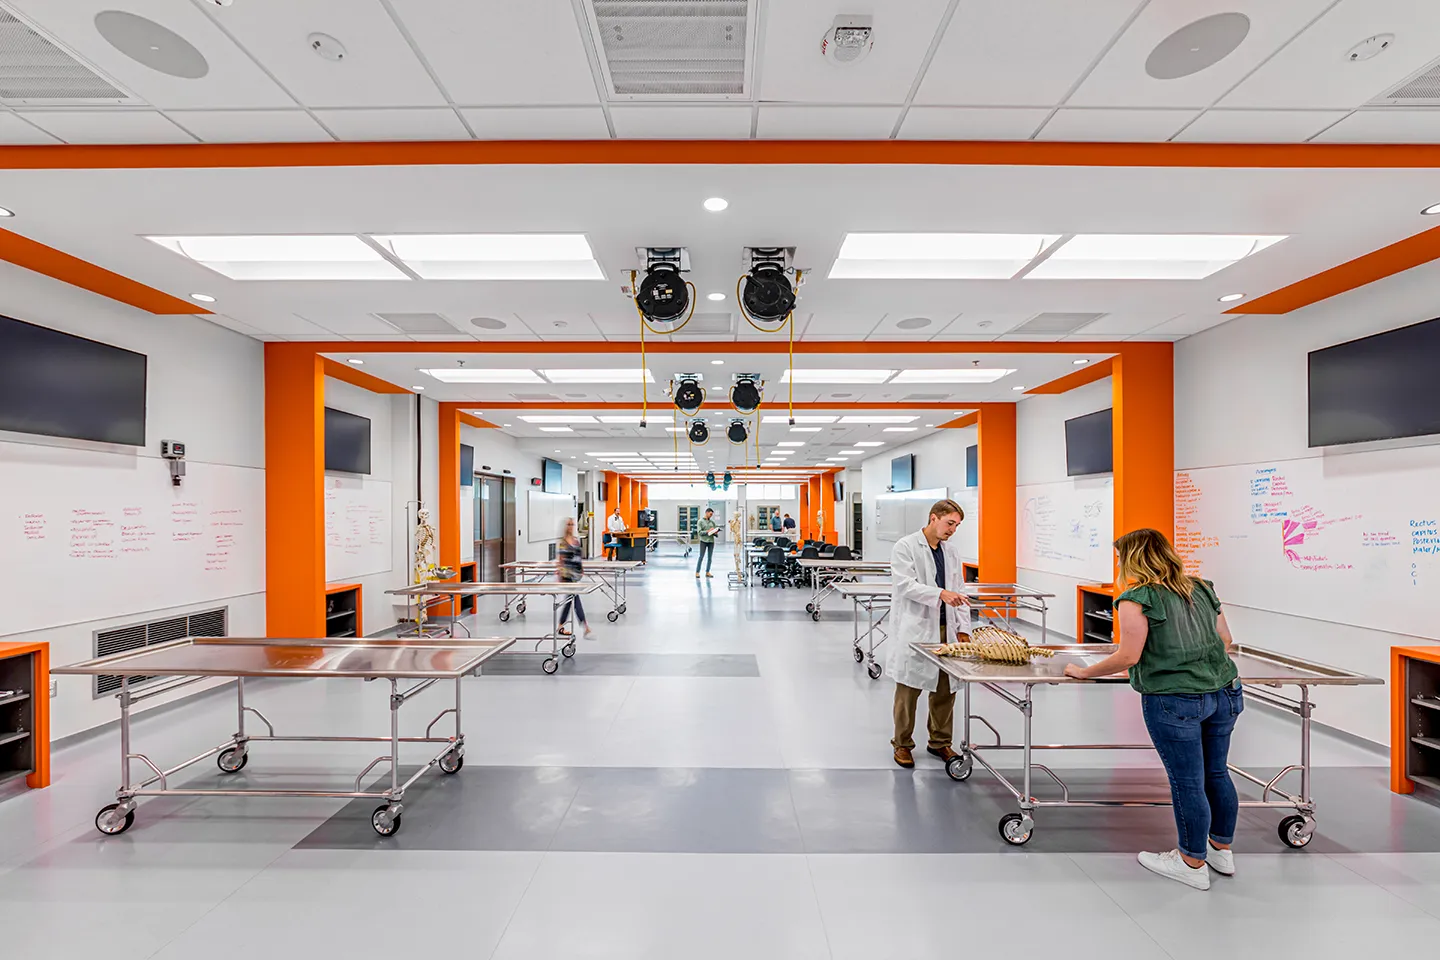 Anatomy (above) and neuroanatomy laboratories were designed to meet teaching and learning needs through modular and flexible layouts with mobile benches, workstations, and equipment that is easily reconfigurable.